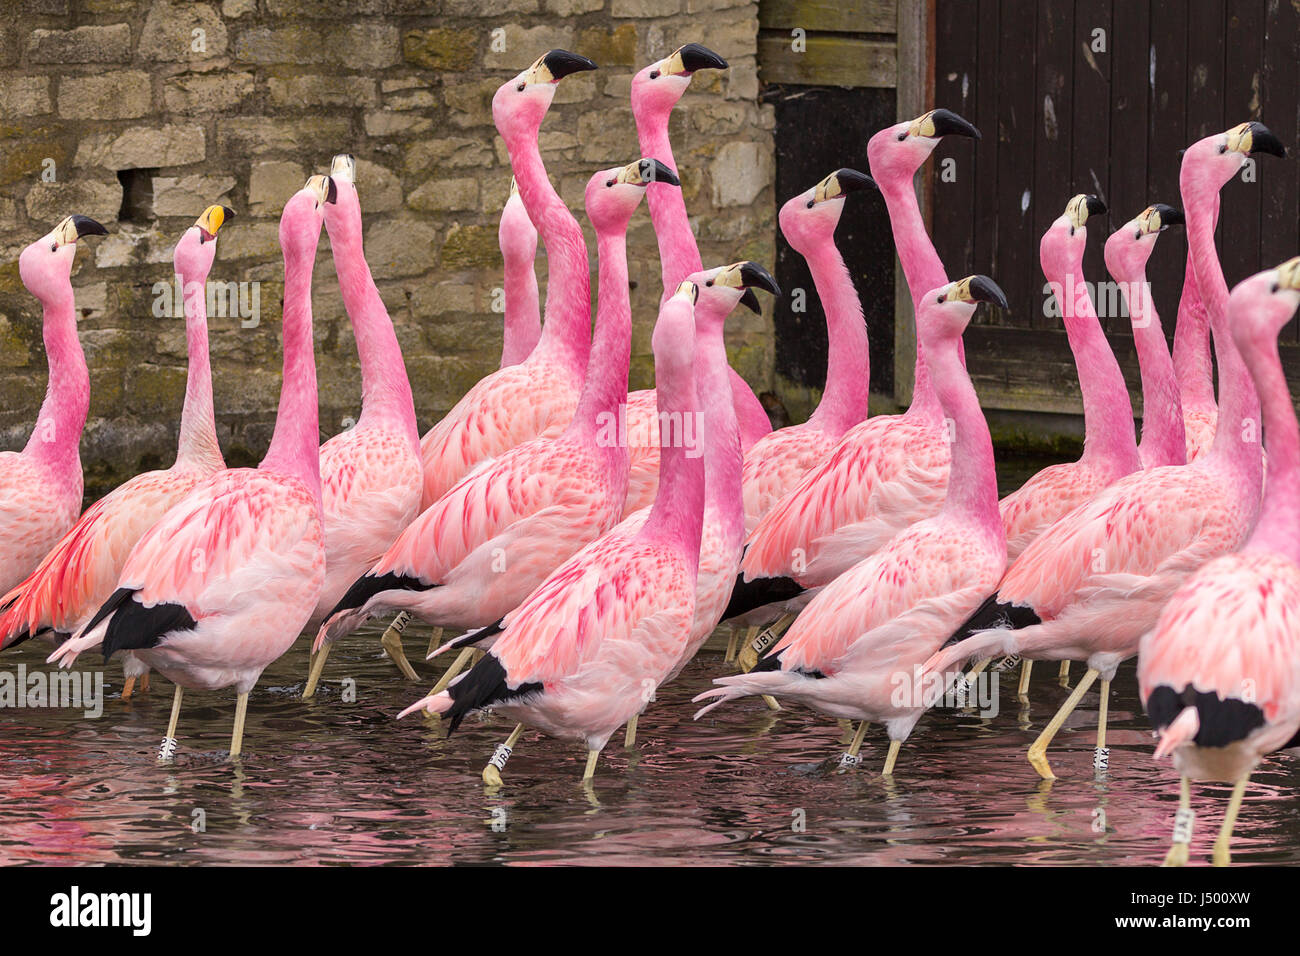 Flamingos seen at Slimbridge wetland centre are bright pink red or orange. The orange one is a greater flamingo. The pink ones are andean species. Stock Photo